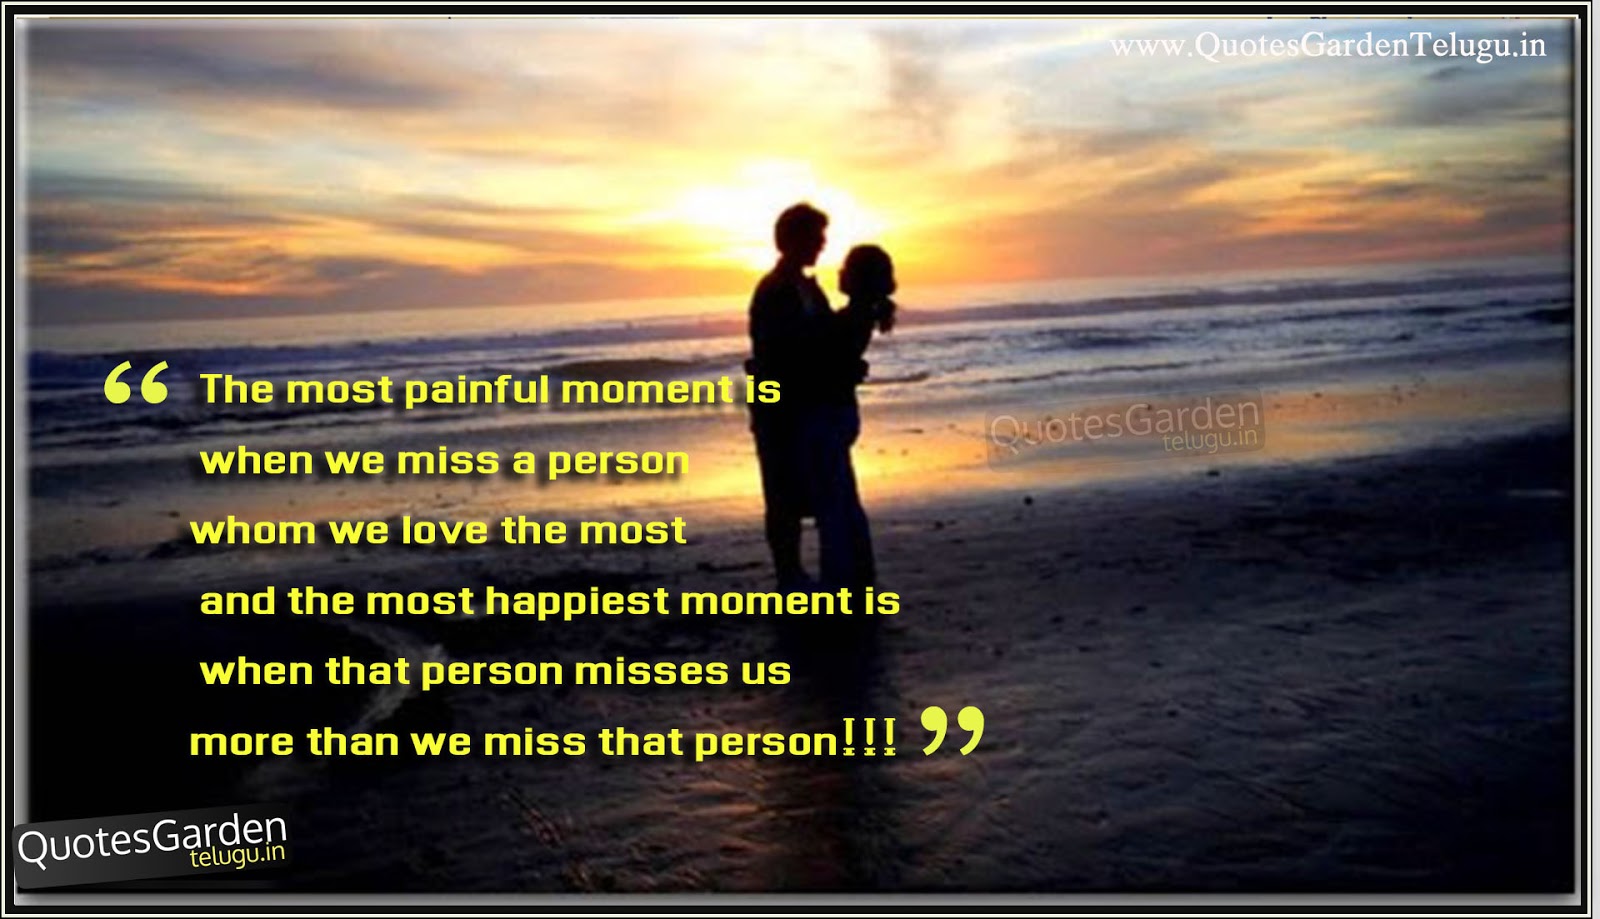 Heart touching love Quotes with touching wallpapers | QUOTES GARDEN TELUGU  | Telugu Quotes | English Quotes | Hindi Quotes |